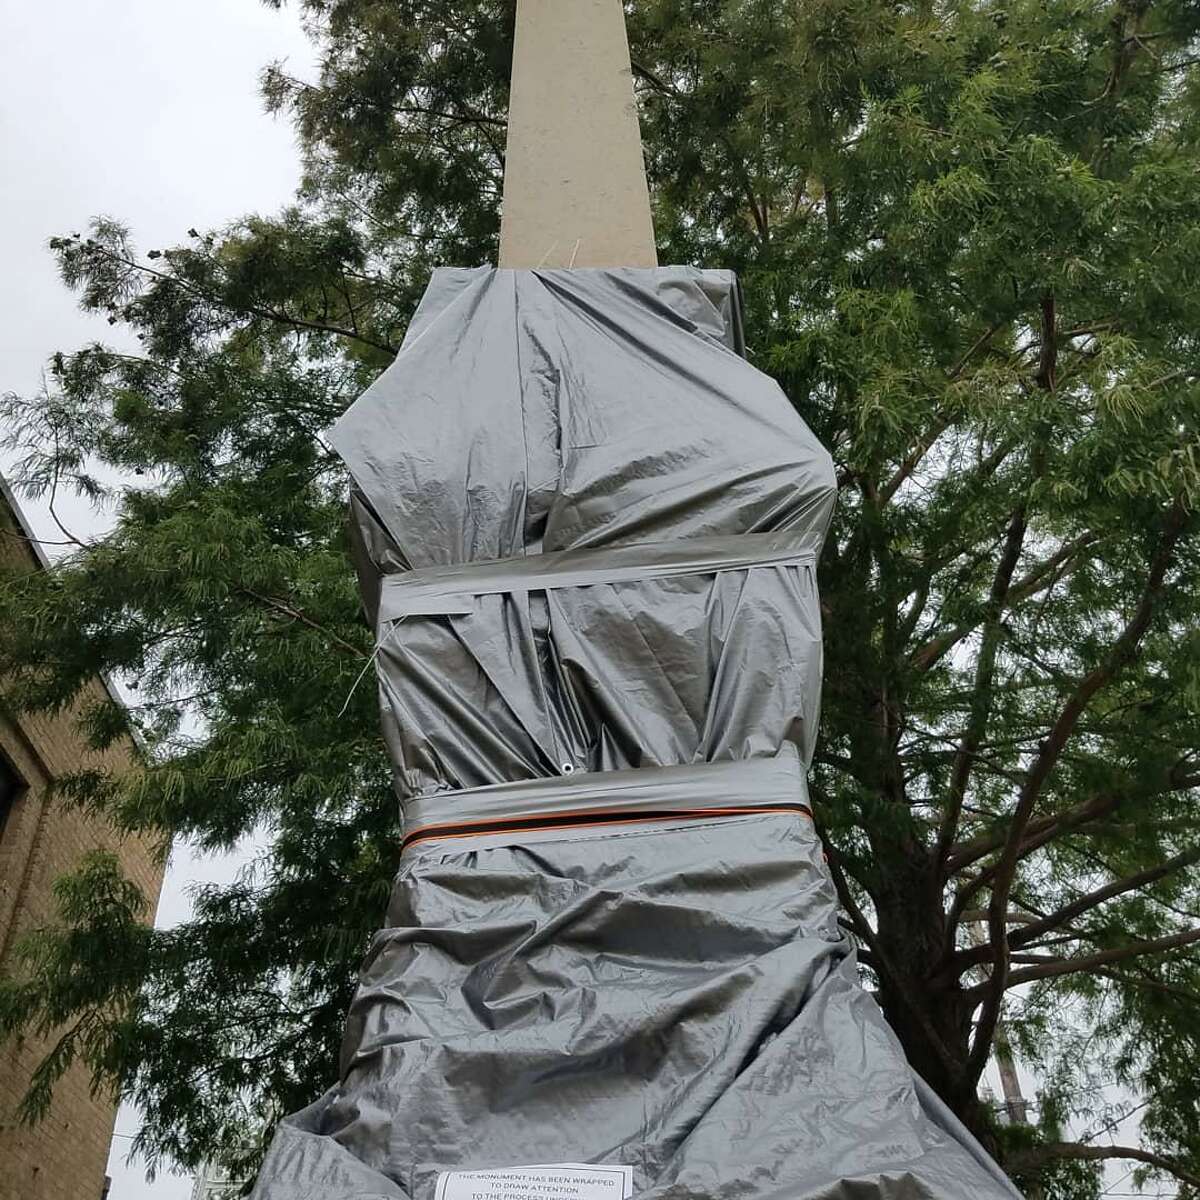 Activists pushing for the removal of the Jaybird-Woodpecker monument in Richmond, Texas have covered the statue in a tarp and erected a sign petitioning for its removal on July 12, 2020.